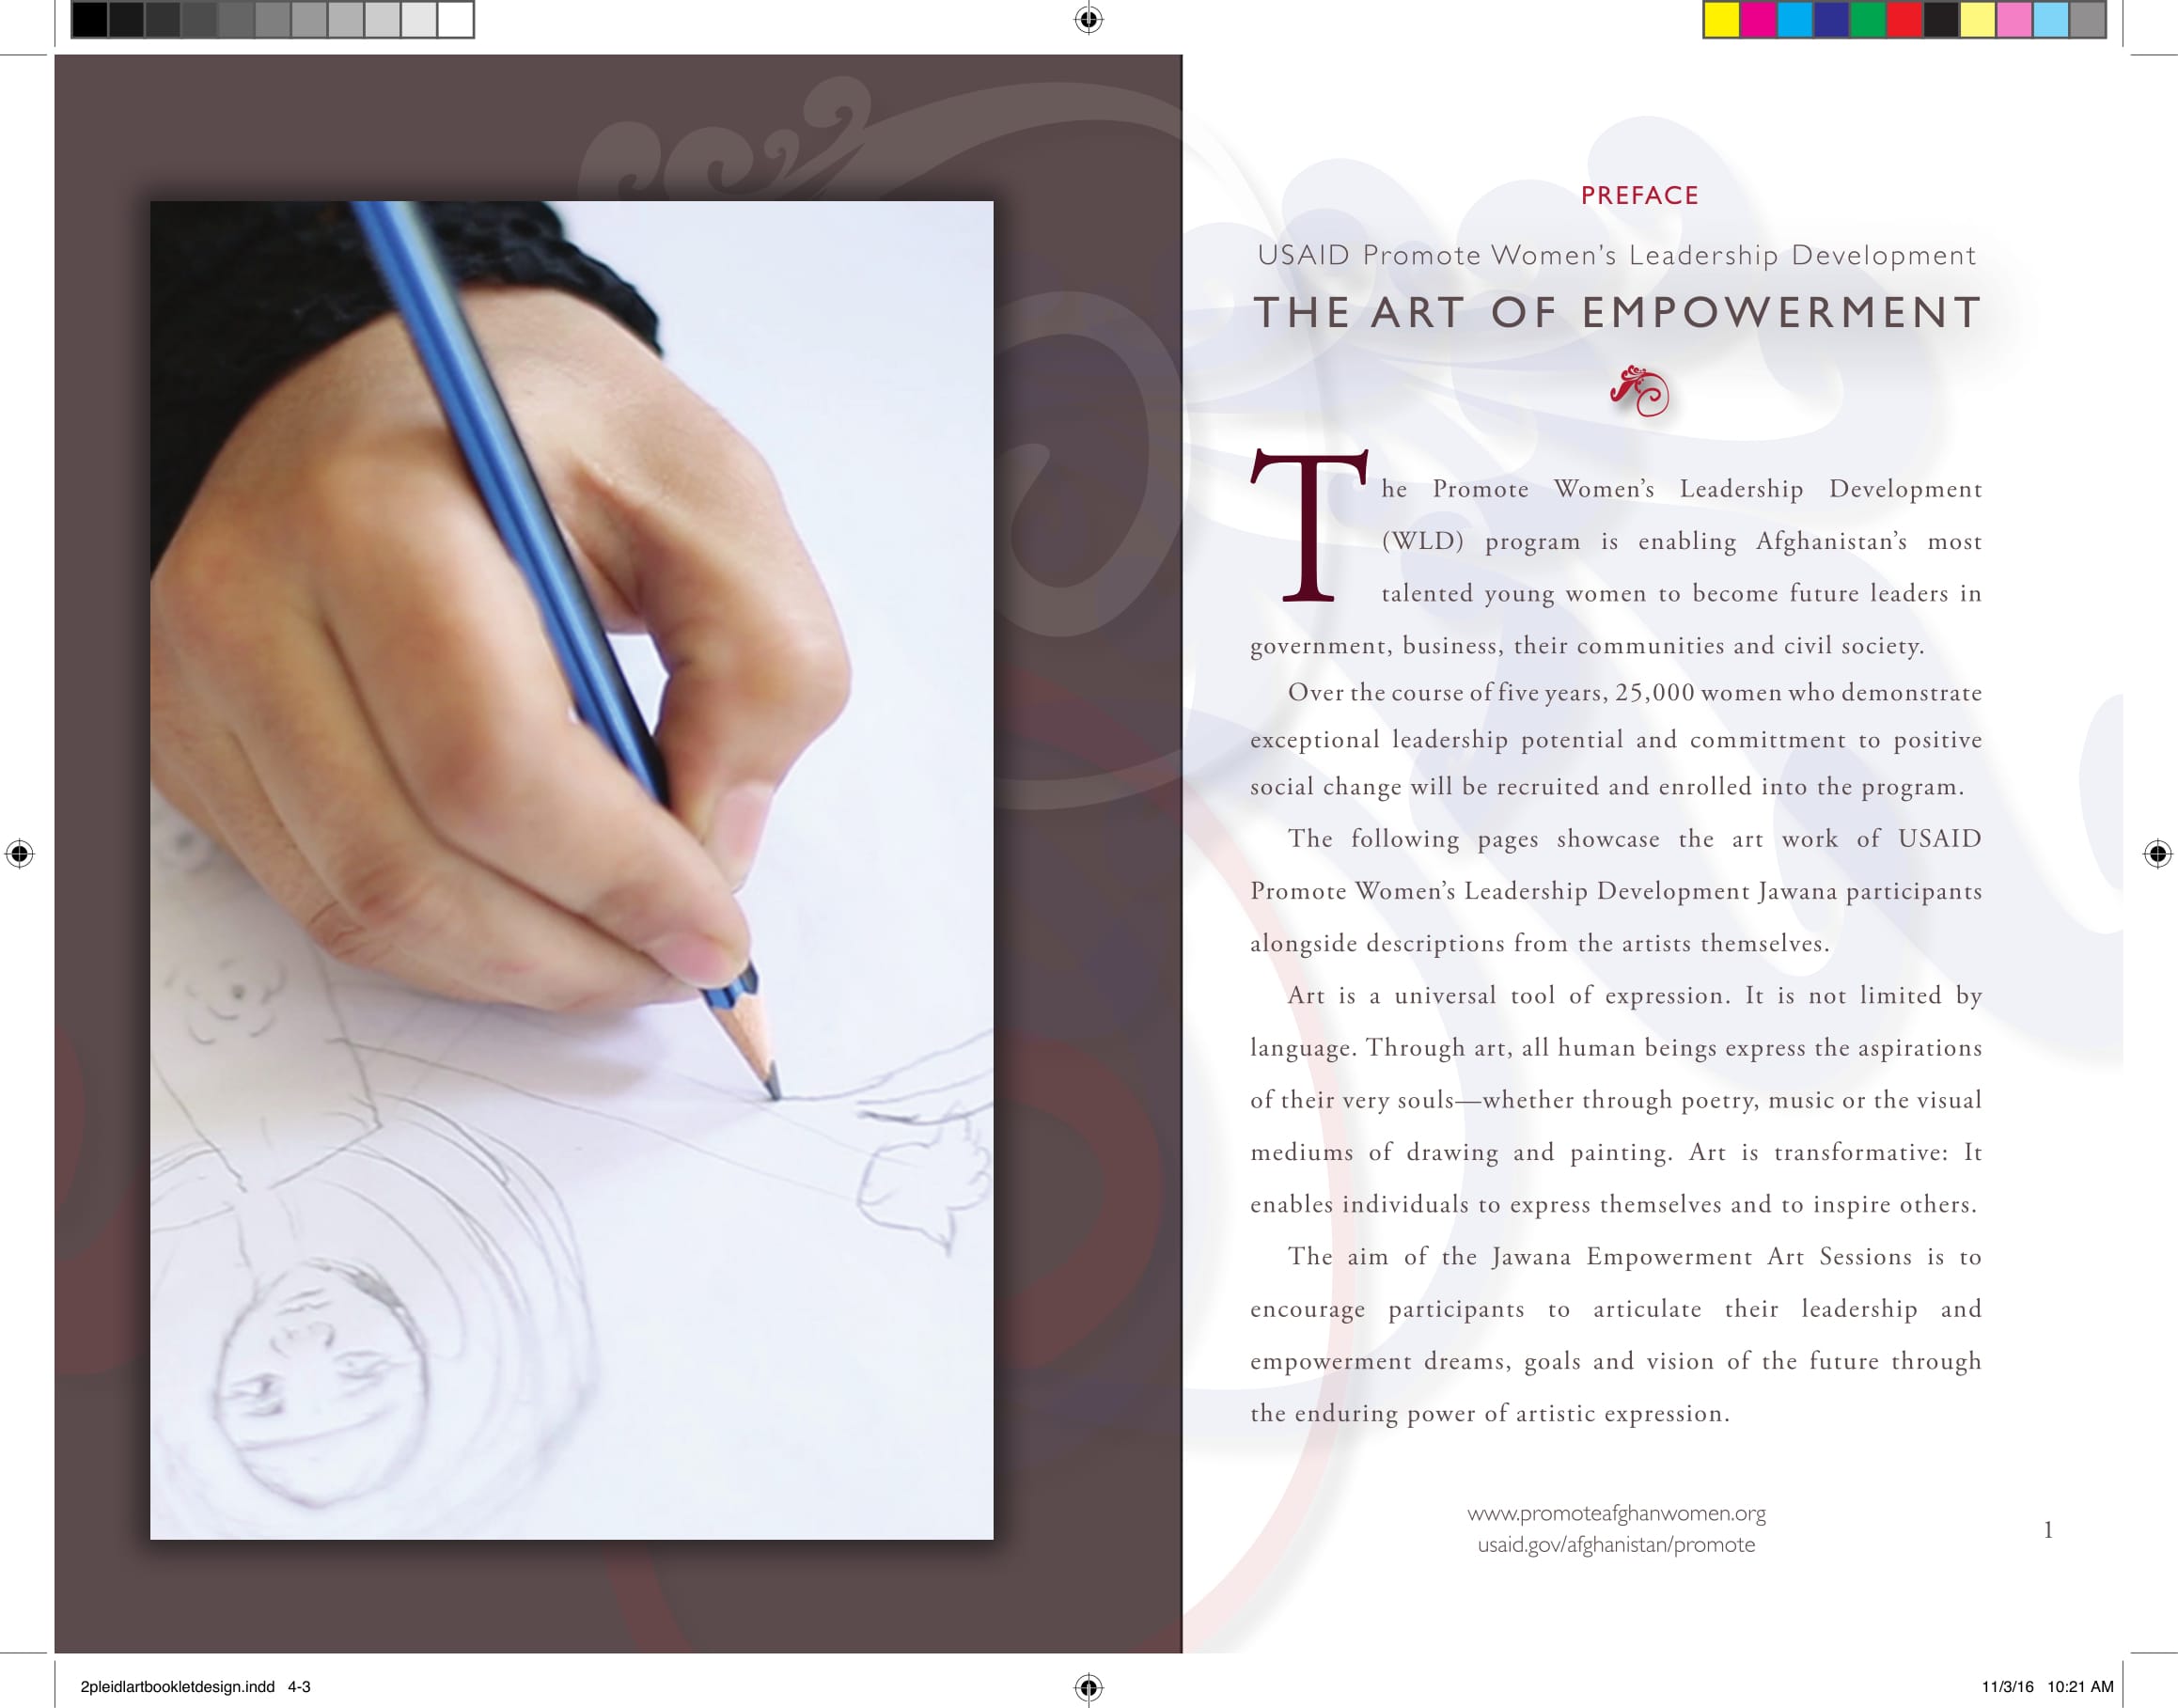 USAID Promote The Art of Empowerment